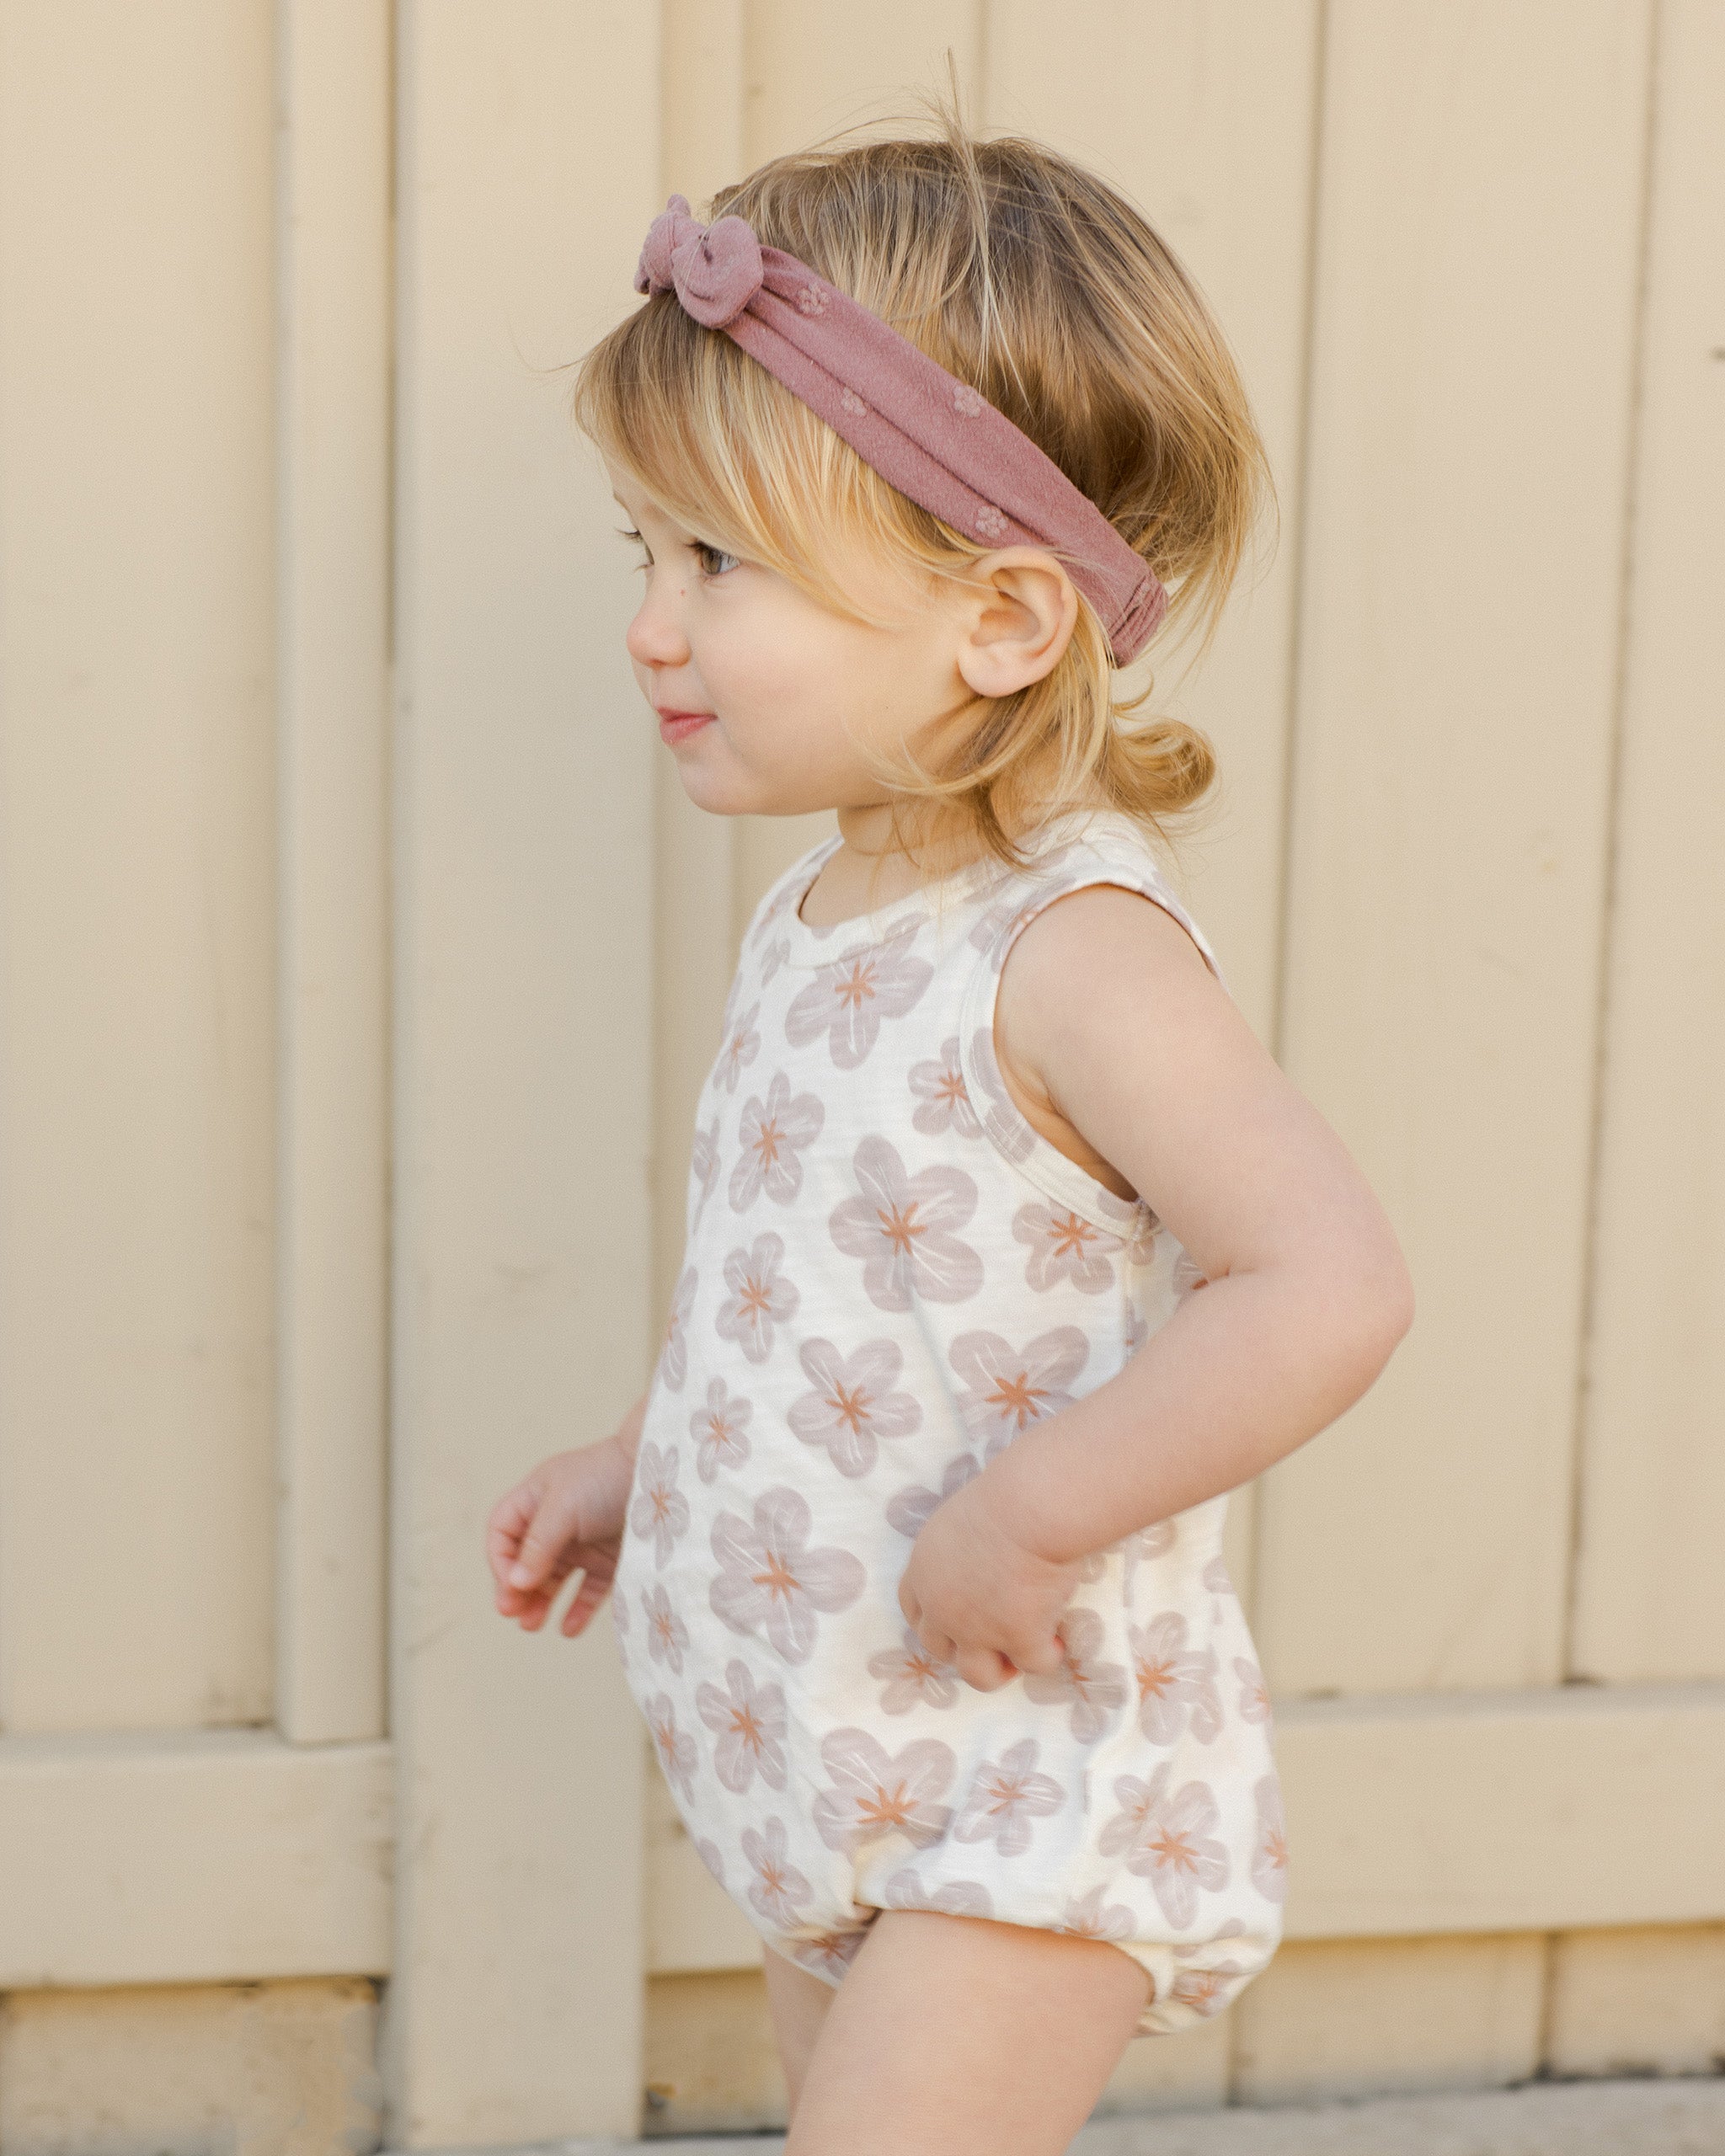 Bubble Onesie || Hibiscus - Rylee + Cru | Kids Clothes | Trendy Baby Clothes | Modern Infant Outfits |